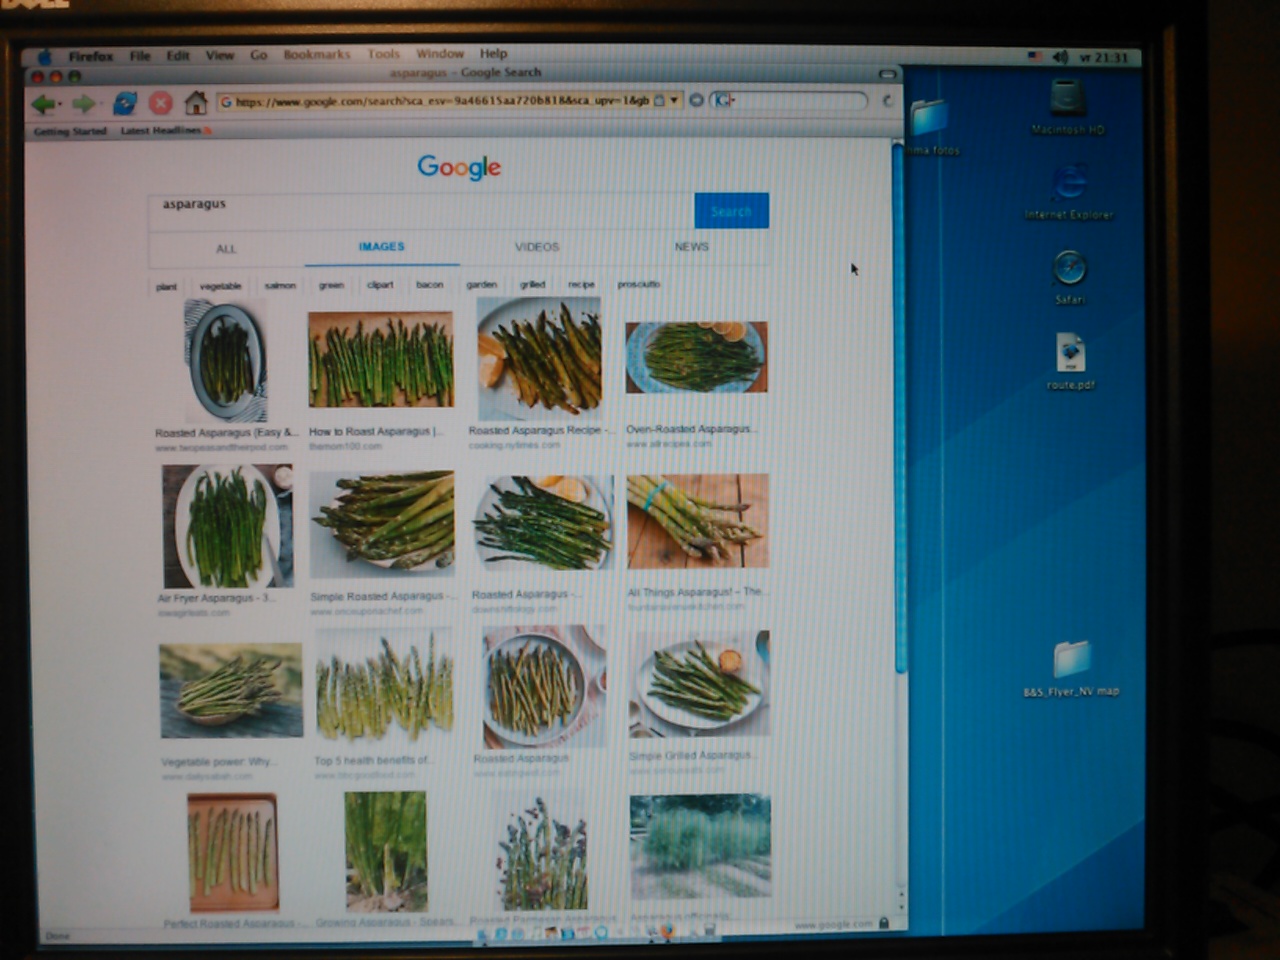 Mozilla Firefox 1.0 displaying a Google Image search for asparagus